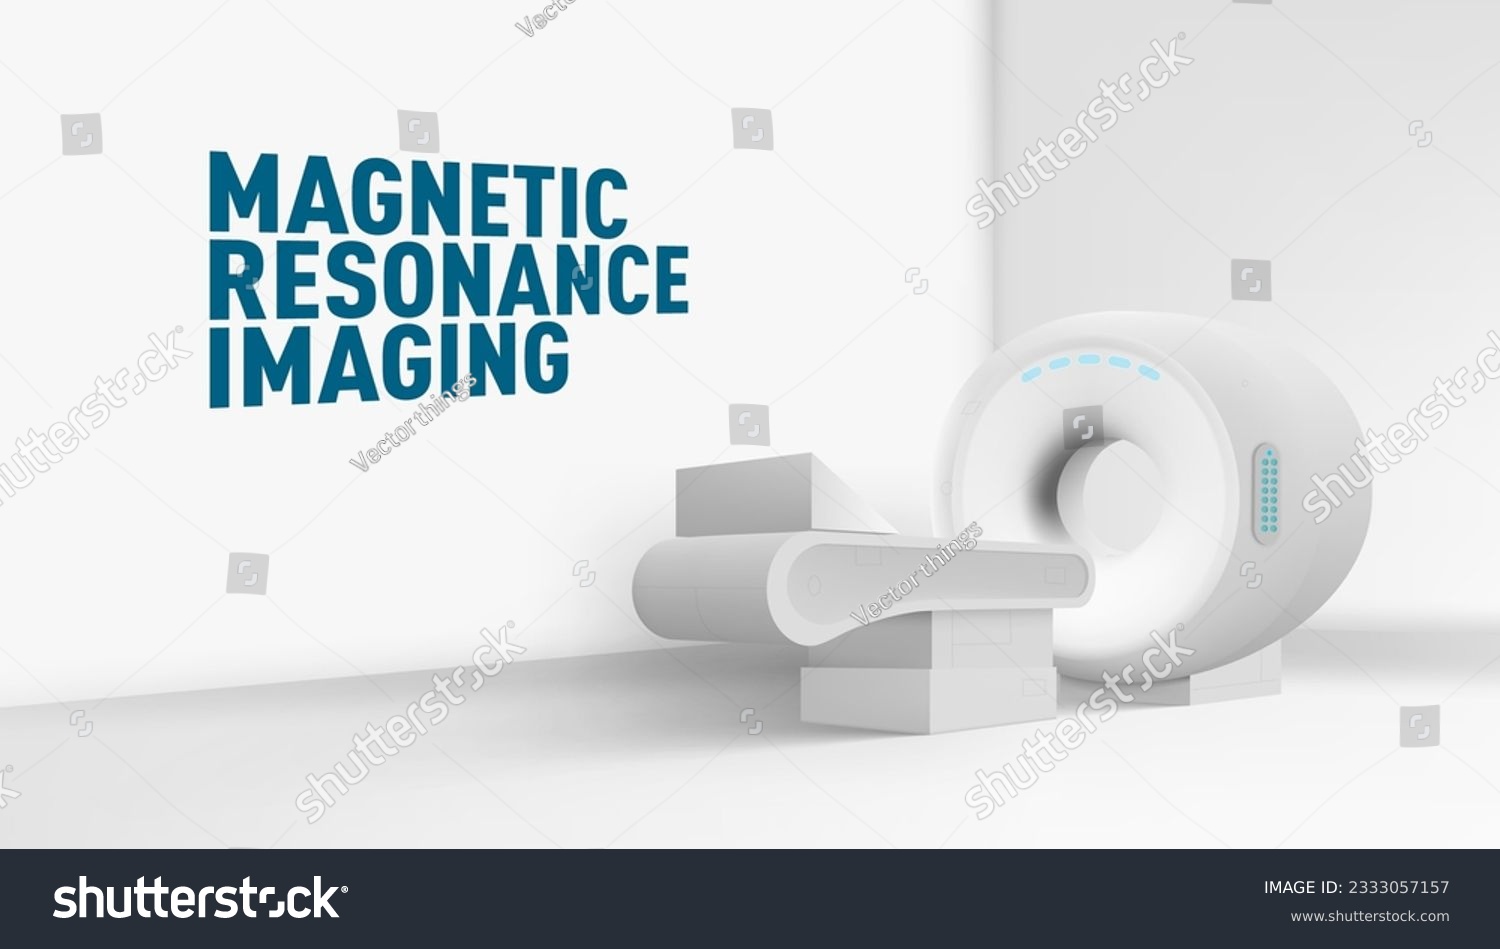 SVG of CT Scan Isolated On White. Magnetic Resonance Imaging Machine. Computerized Axial Tomography Scan. EPS10 Vector svg